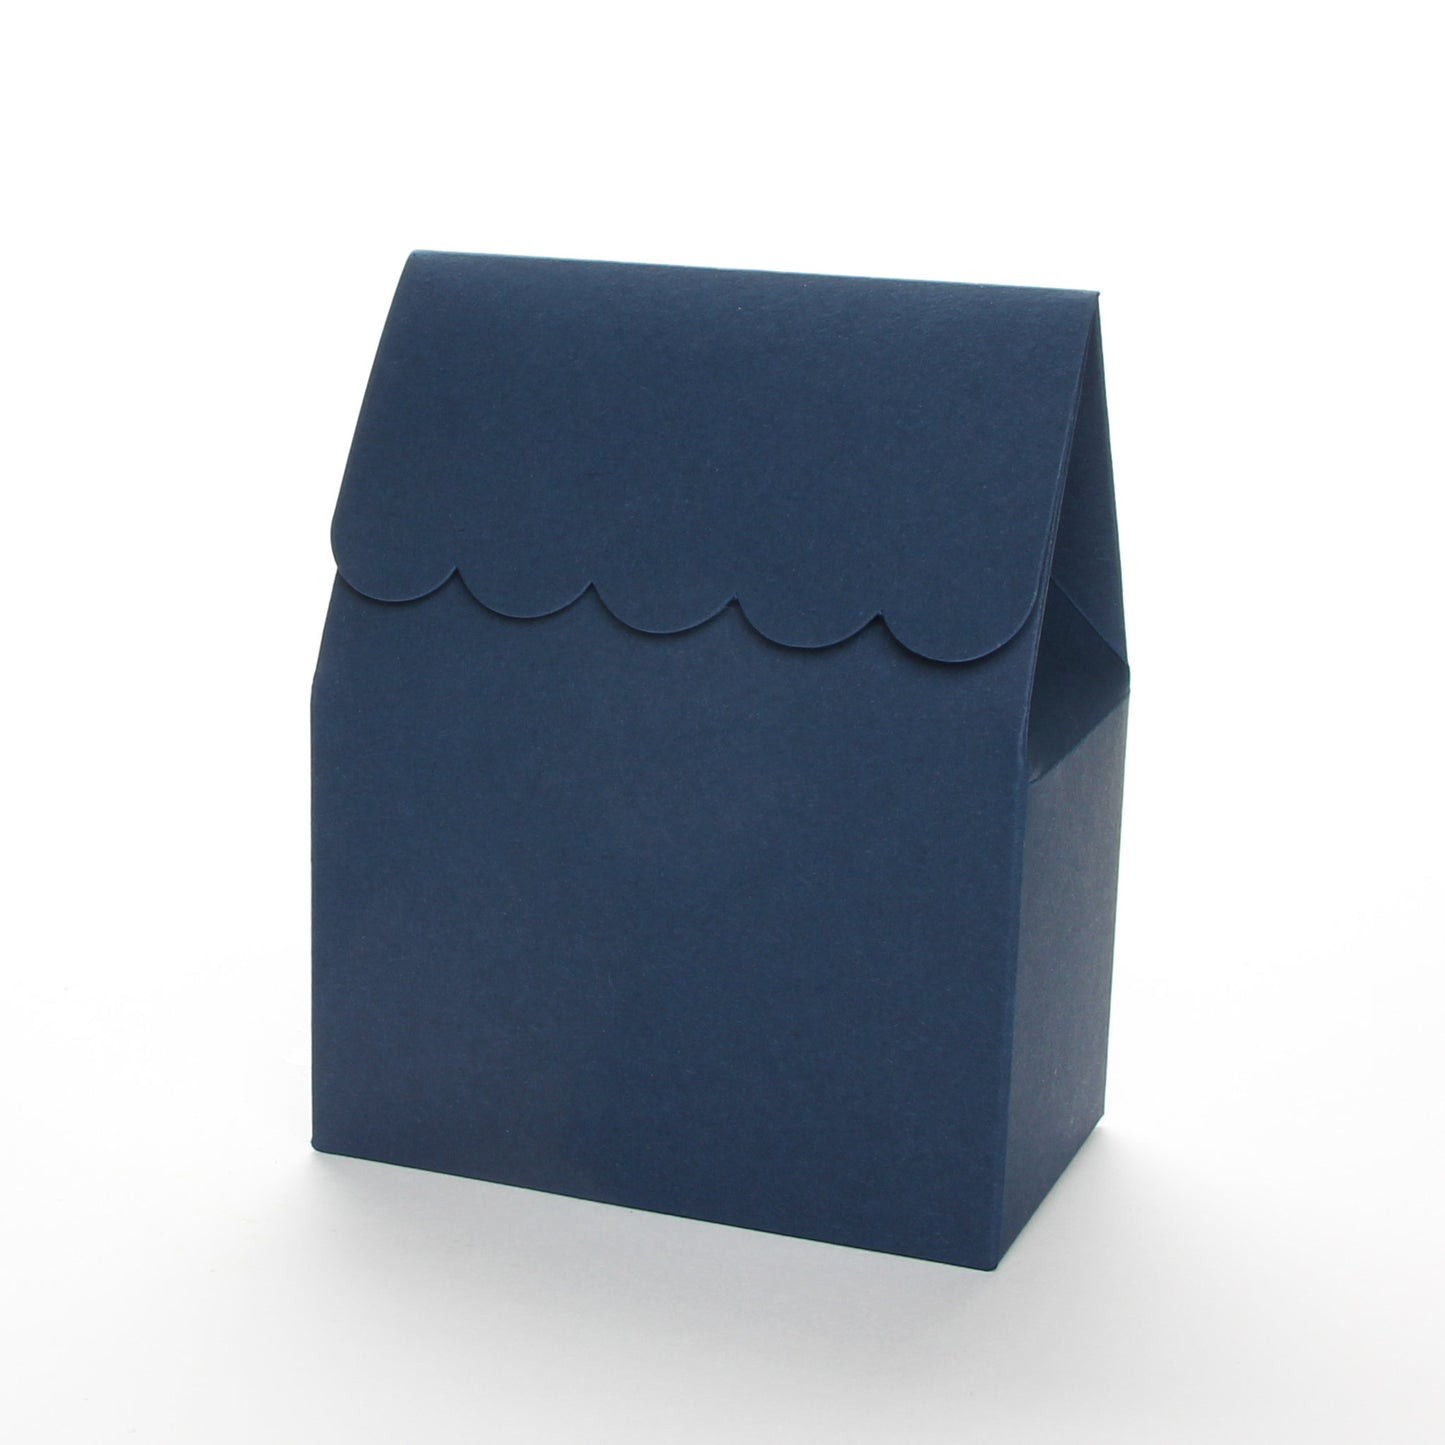 Navy blue favor box by Lux Party with a scalloped edge on a white background.